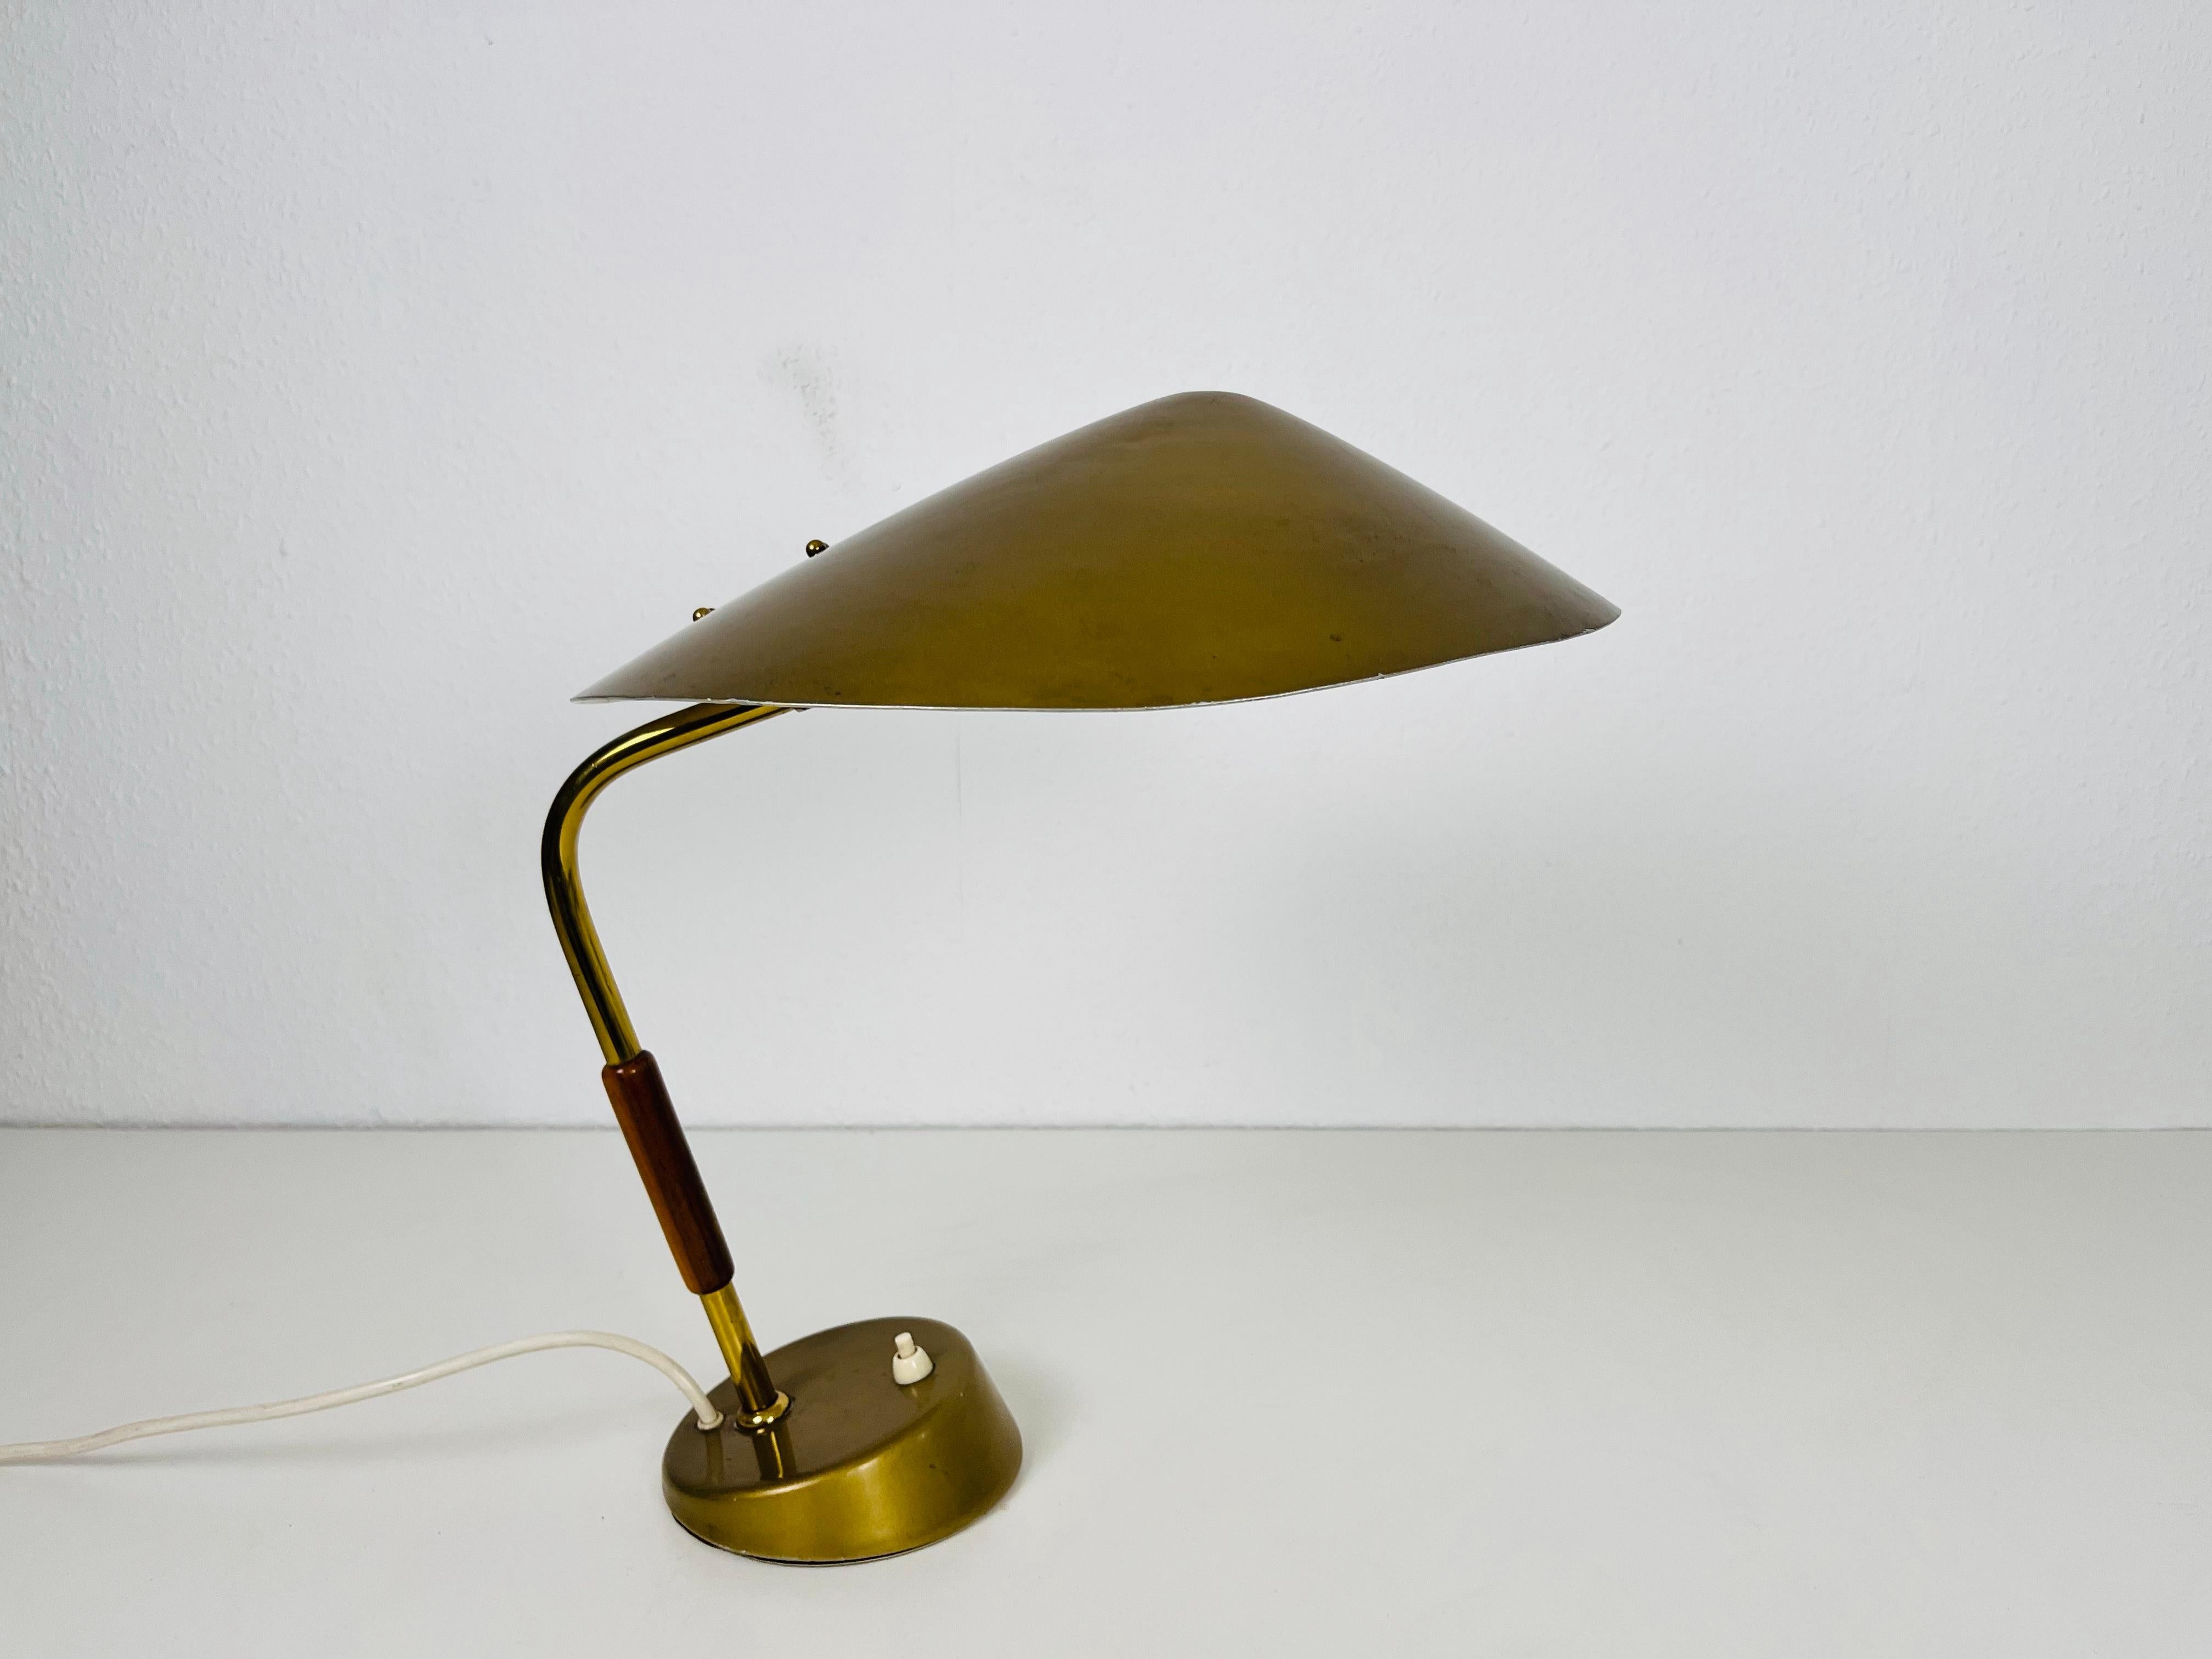 An Italian table lamp made in the 1960s. The lighting has an exceptional design which is similar to the table lamps made by Stilnovo. It is made of brass with a beautiful wooden element.

The light requires one E27 (US E26) light bulb. Works with